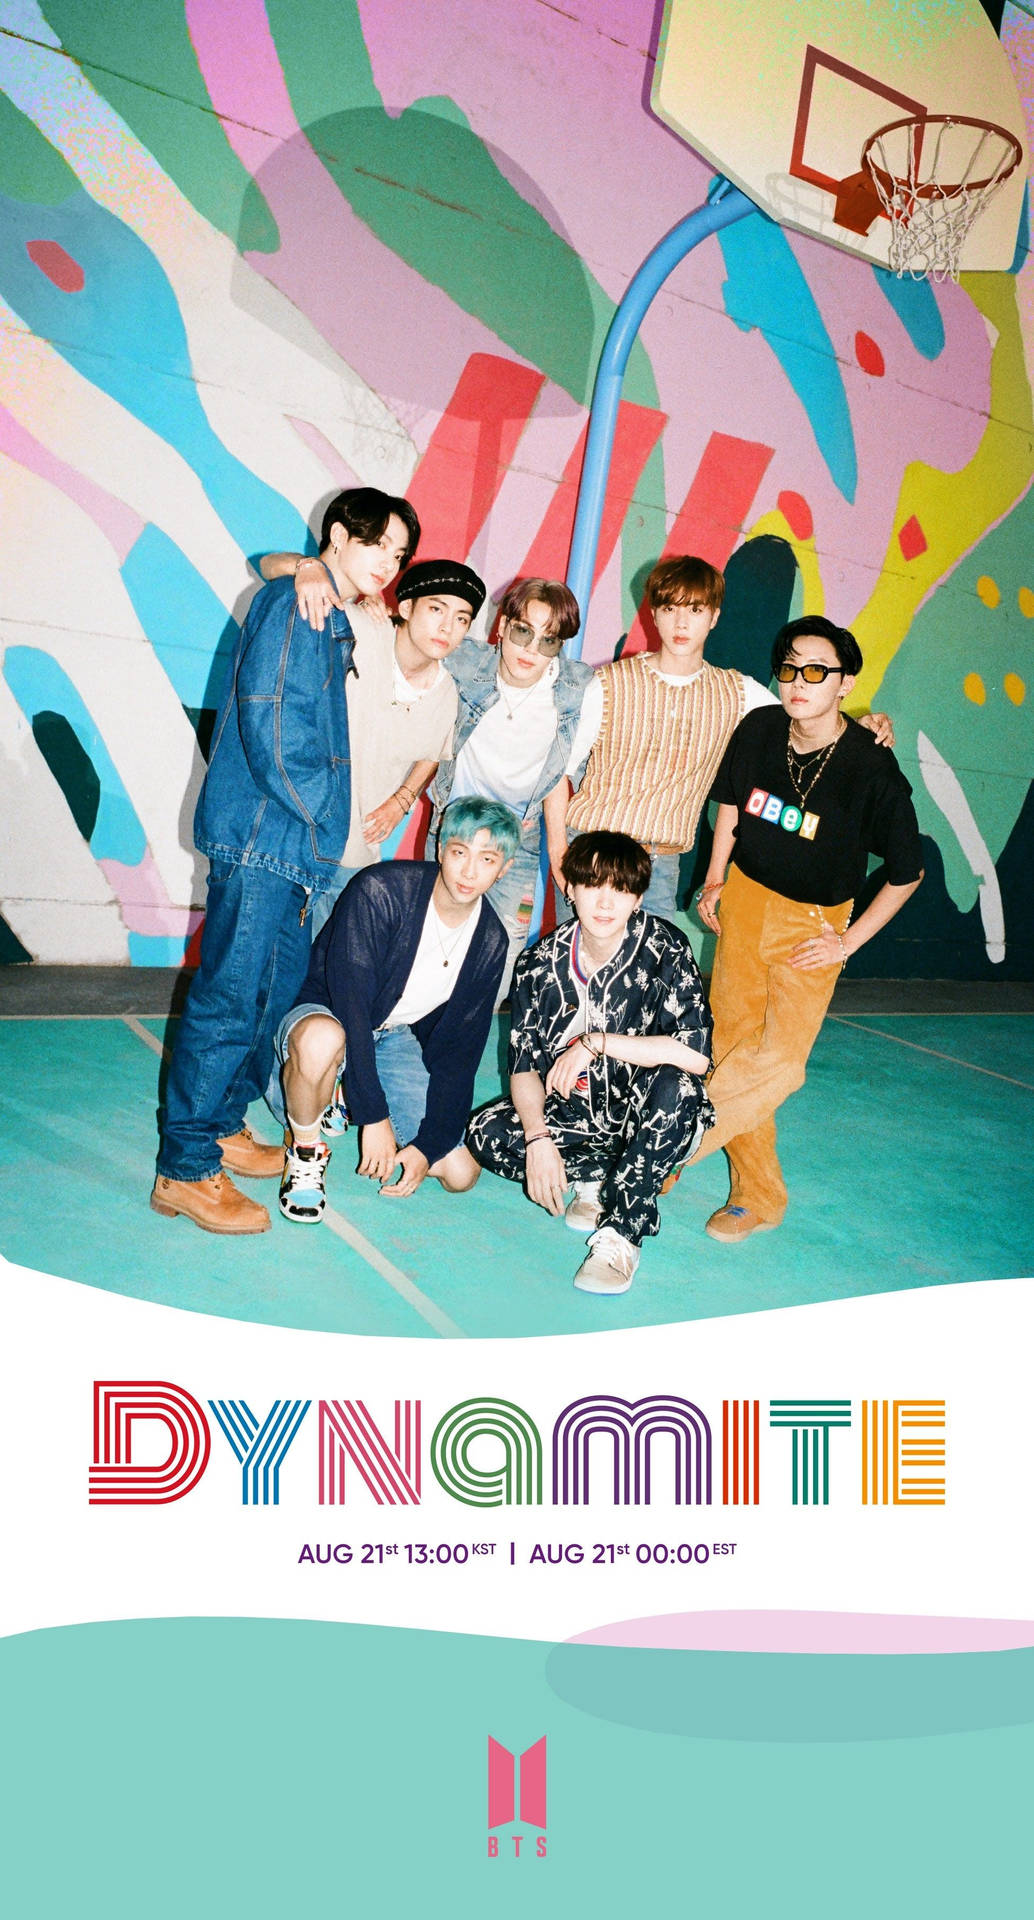 Download Bts Dynamite Official Release Date Wallpaper 